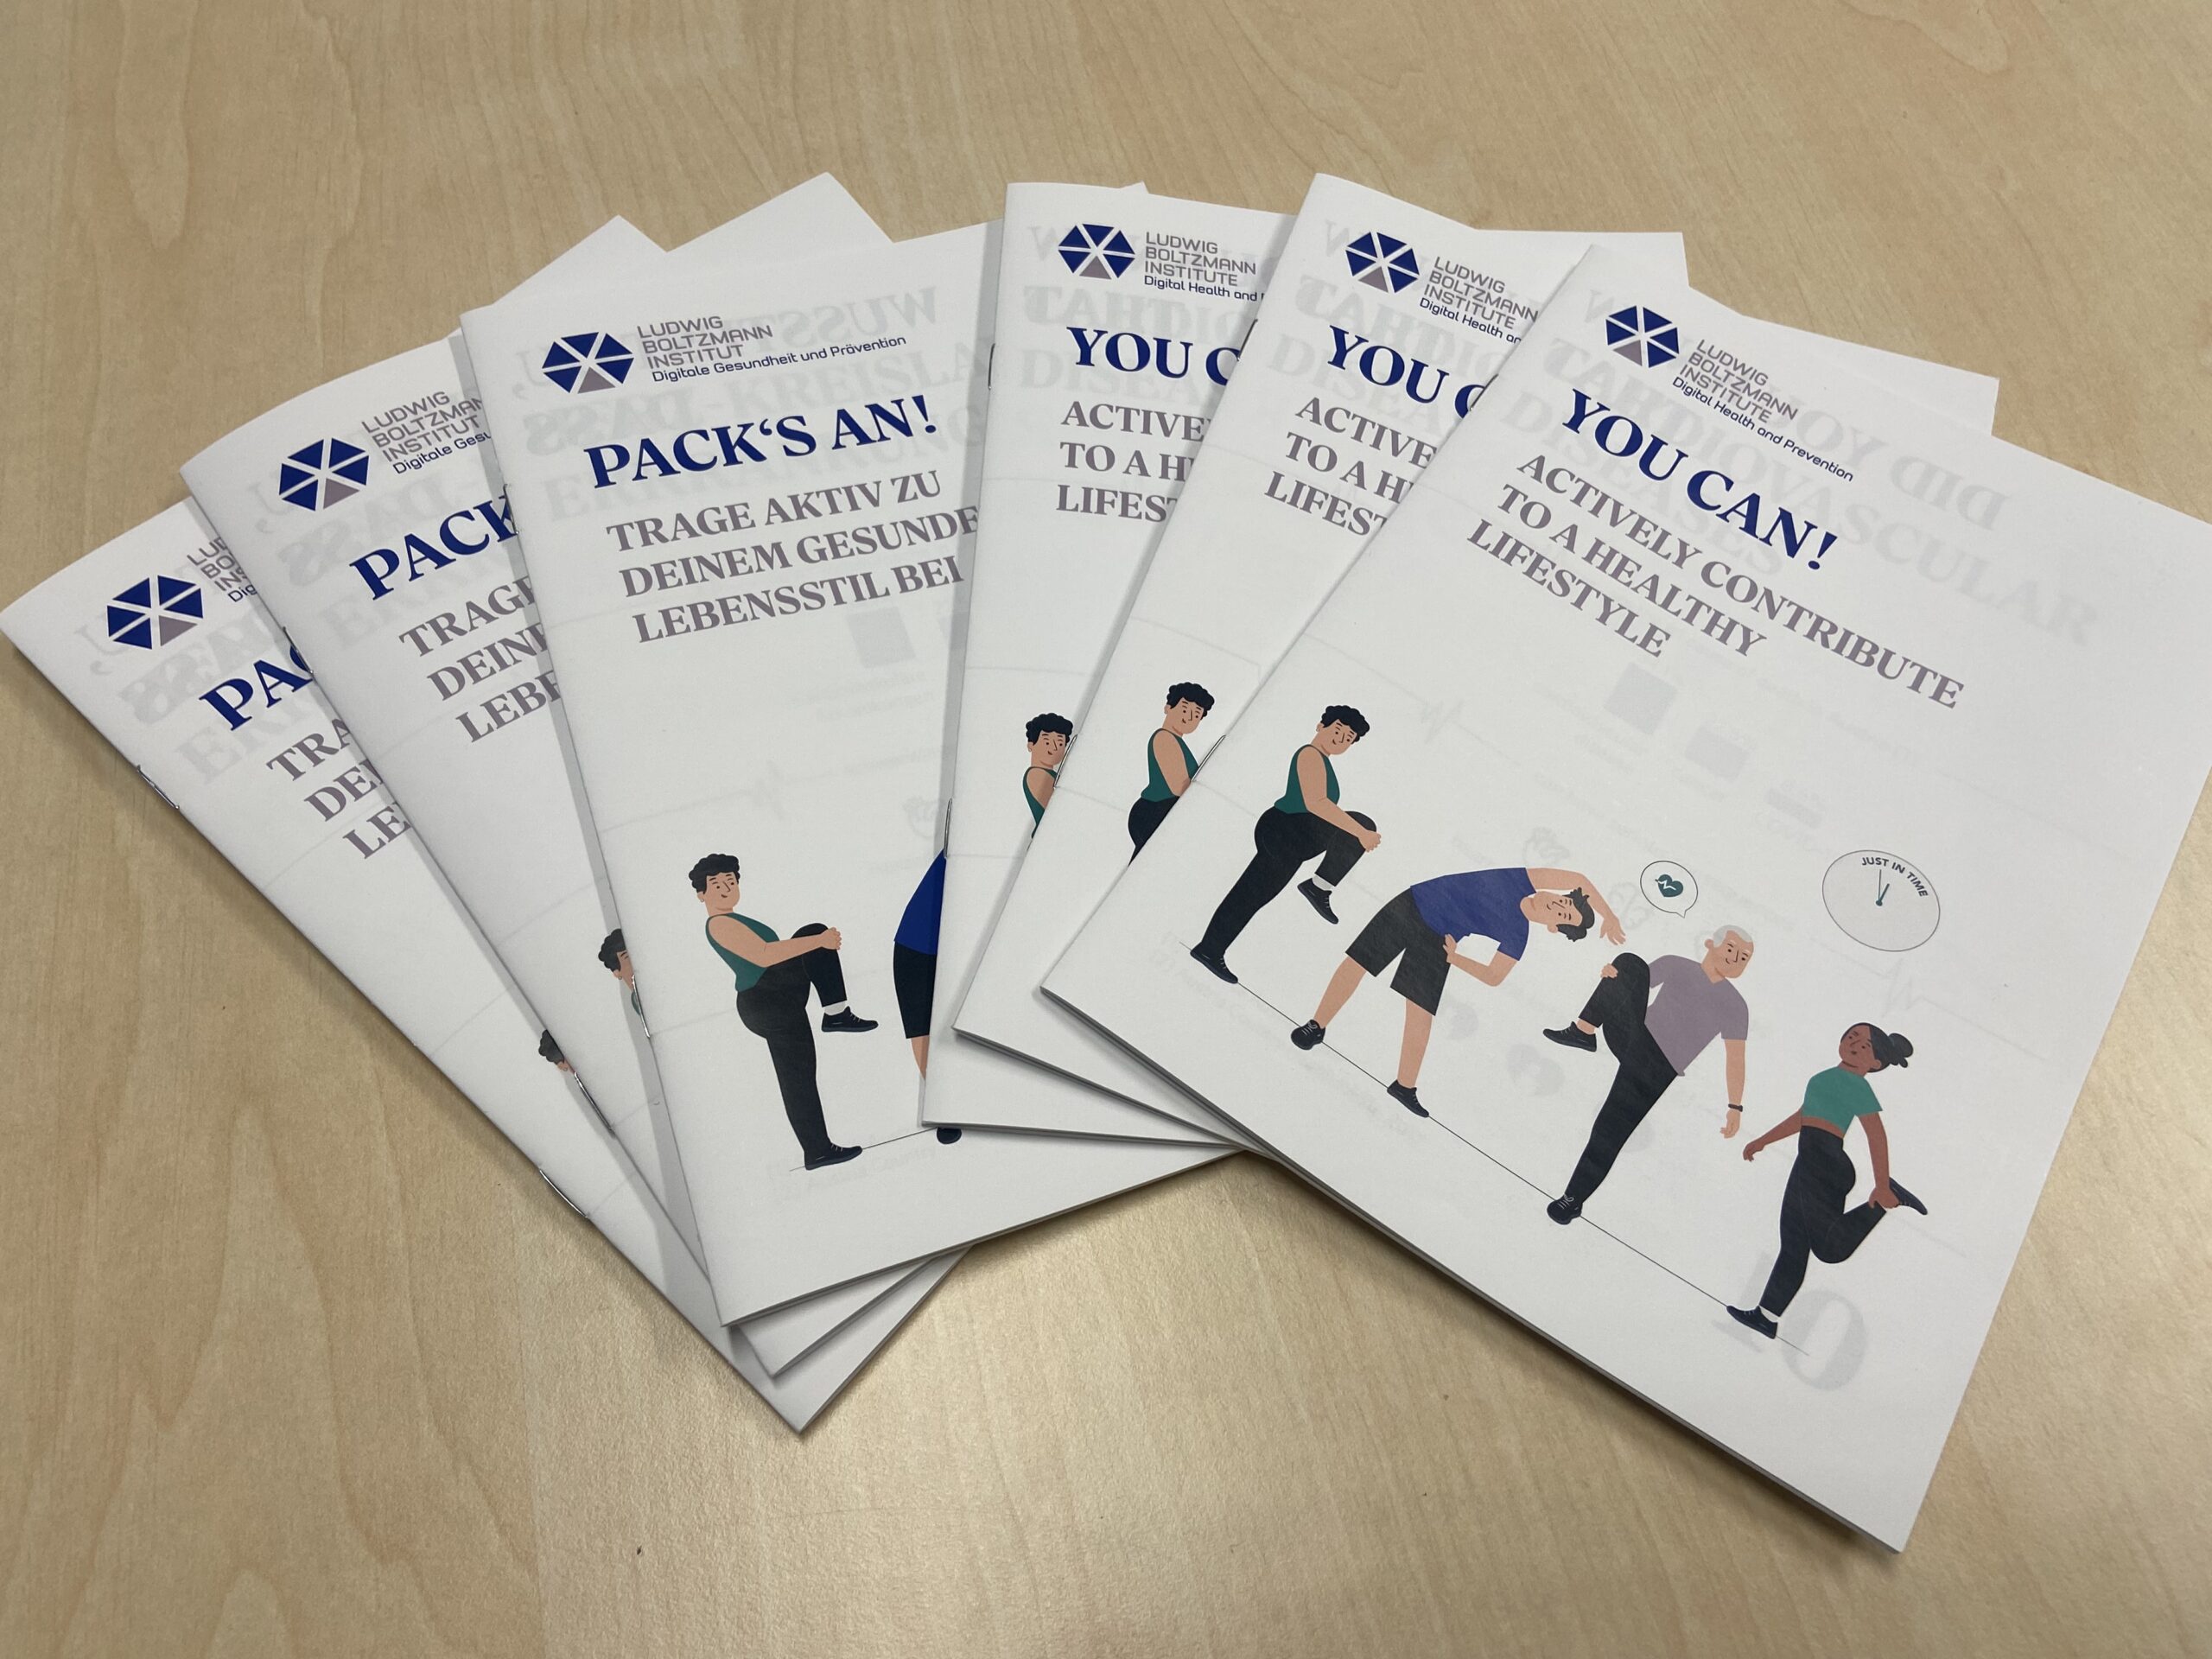 Hot off the press: the new booklet from the LBI for Digital Health and Prevention